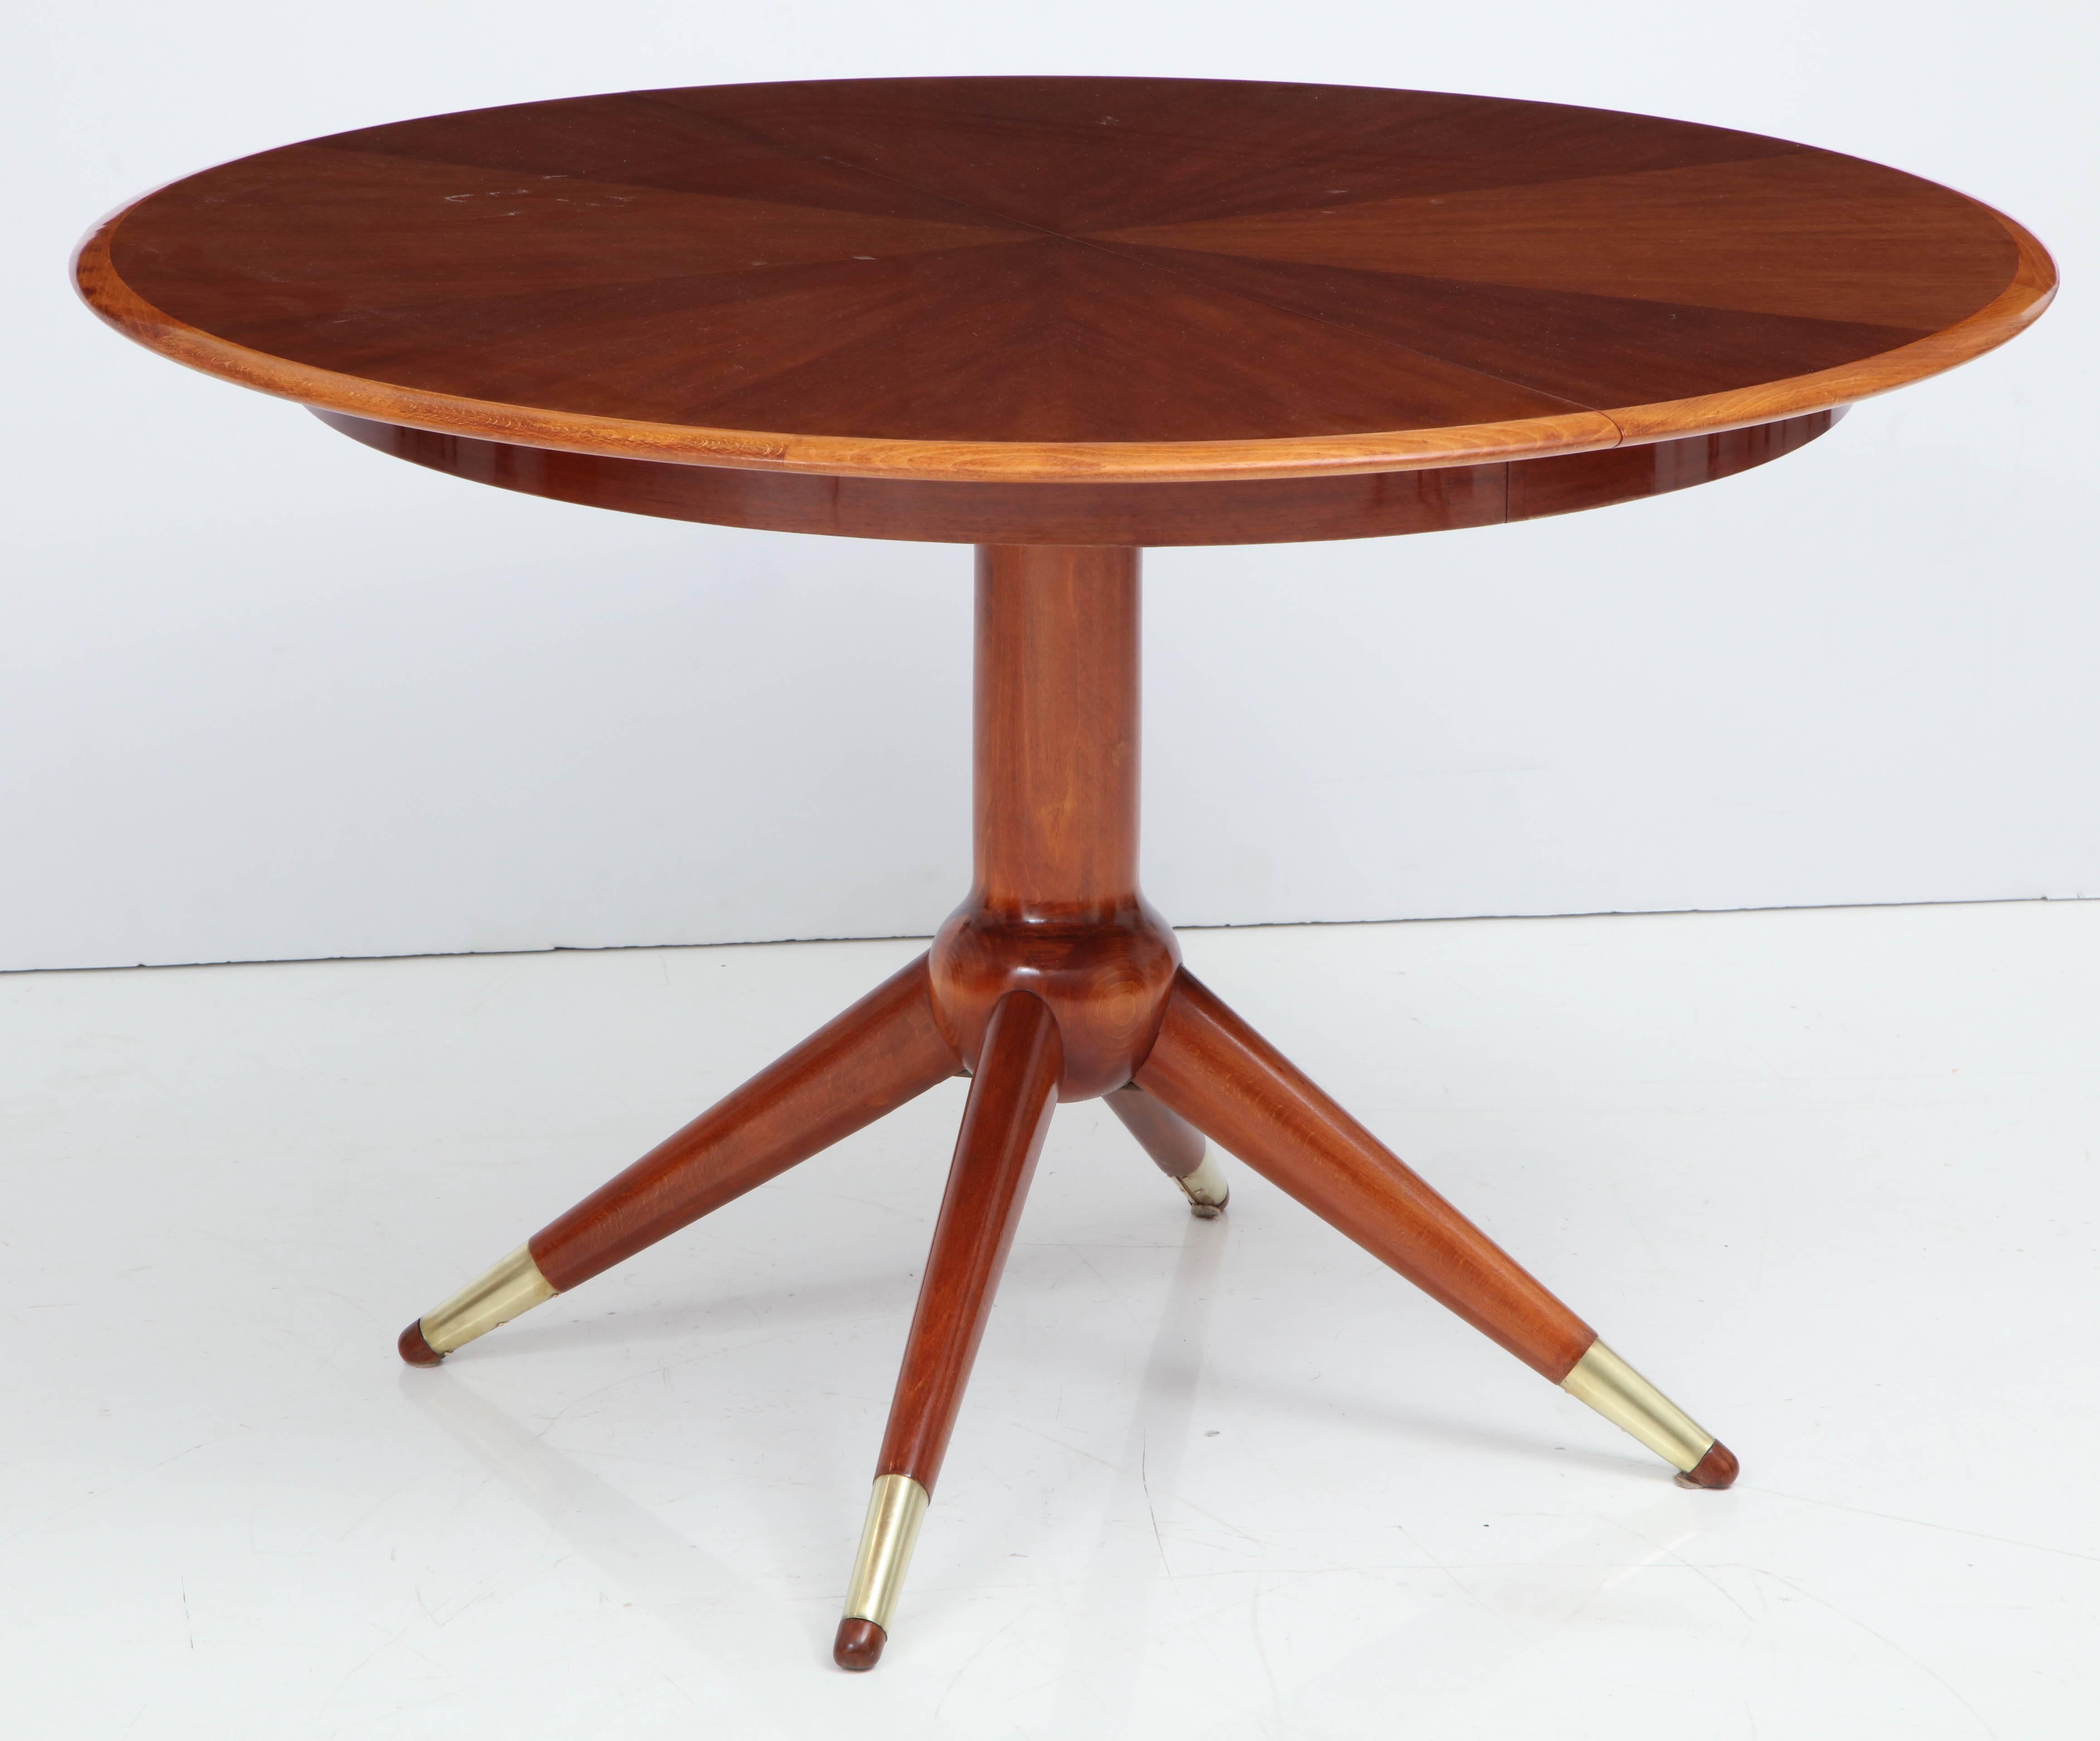 A Swedish mahogany and brass-mounted pedestal extension table by David Rosén for Nordiska Kompaniet, mid-20th century, the divided circular top with a radiated veneer, above a conforming frieze with a circular central stem and four tapered canted